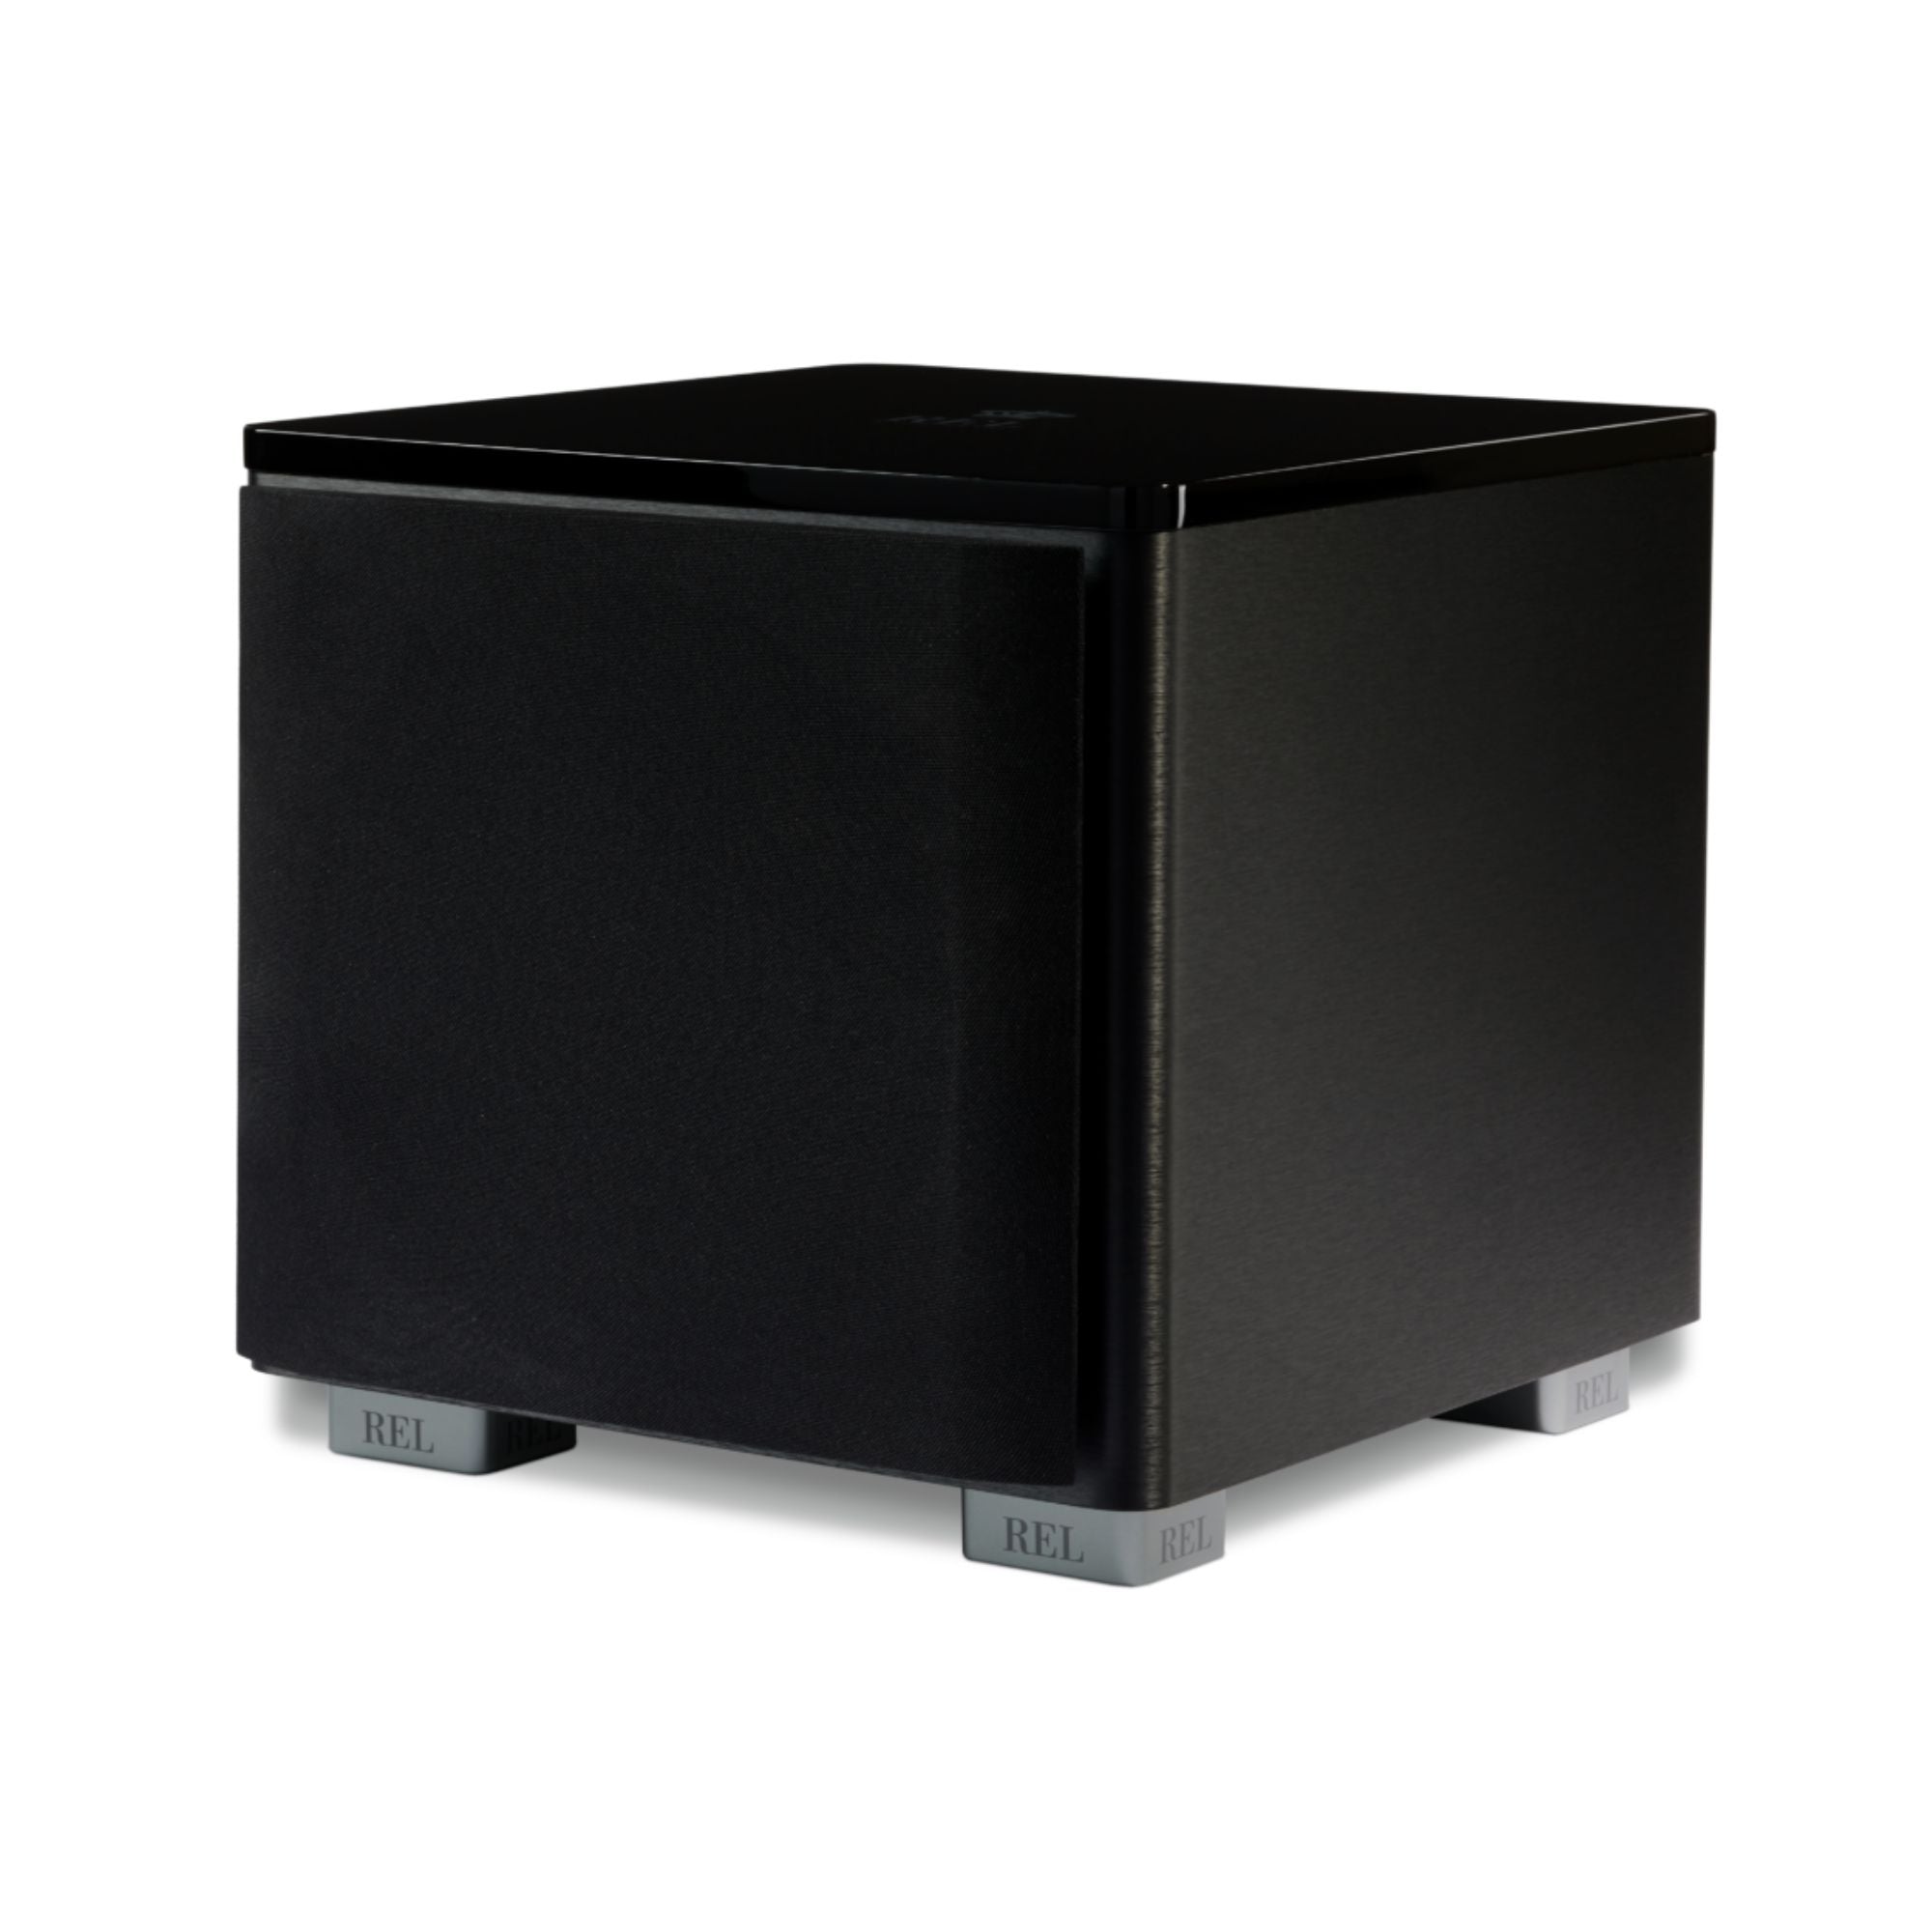 REL Acoustics HT/1205 MKII - 12 Inches Powered Subwoofer, REL Acoustics, Subwoofer - AVStore.in